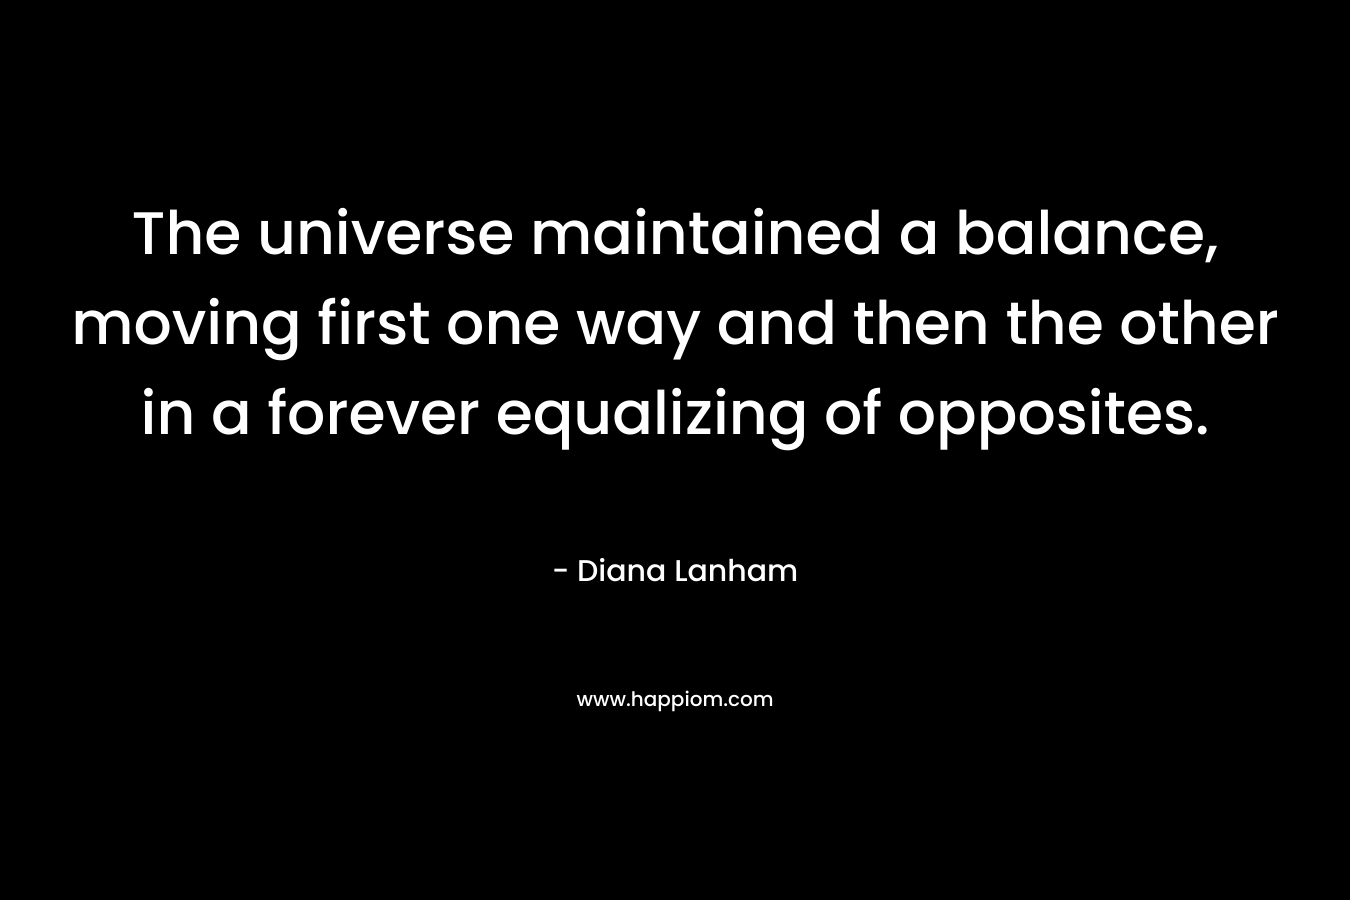 The universe maintained a balance, moving first one way and then the other in a forever equalizing of opposites.